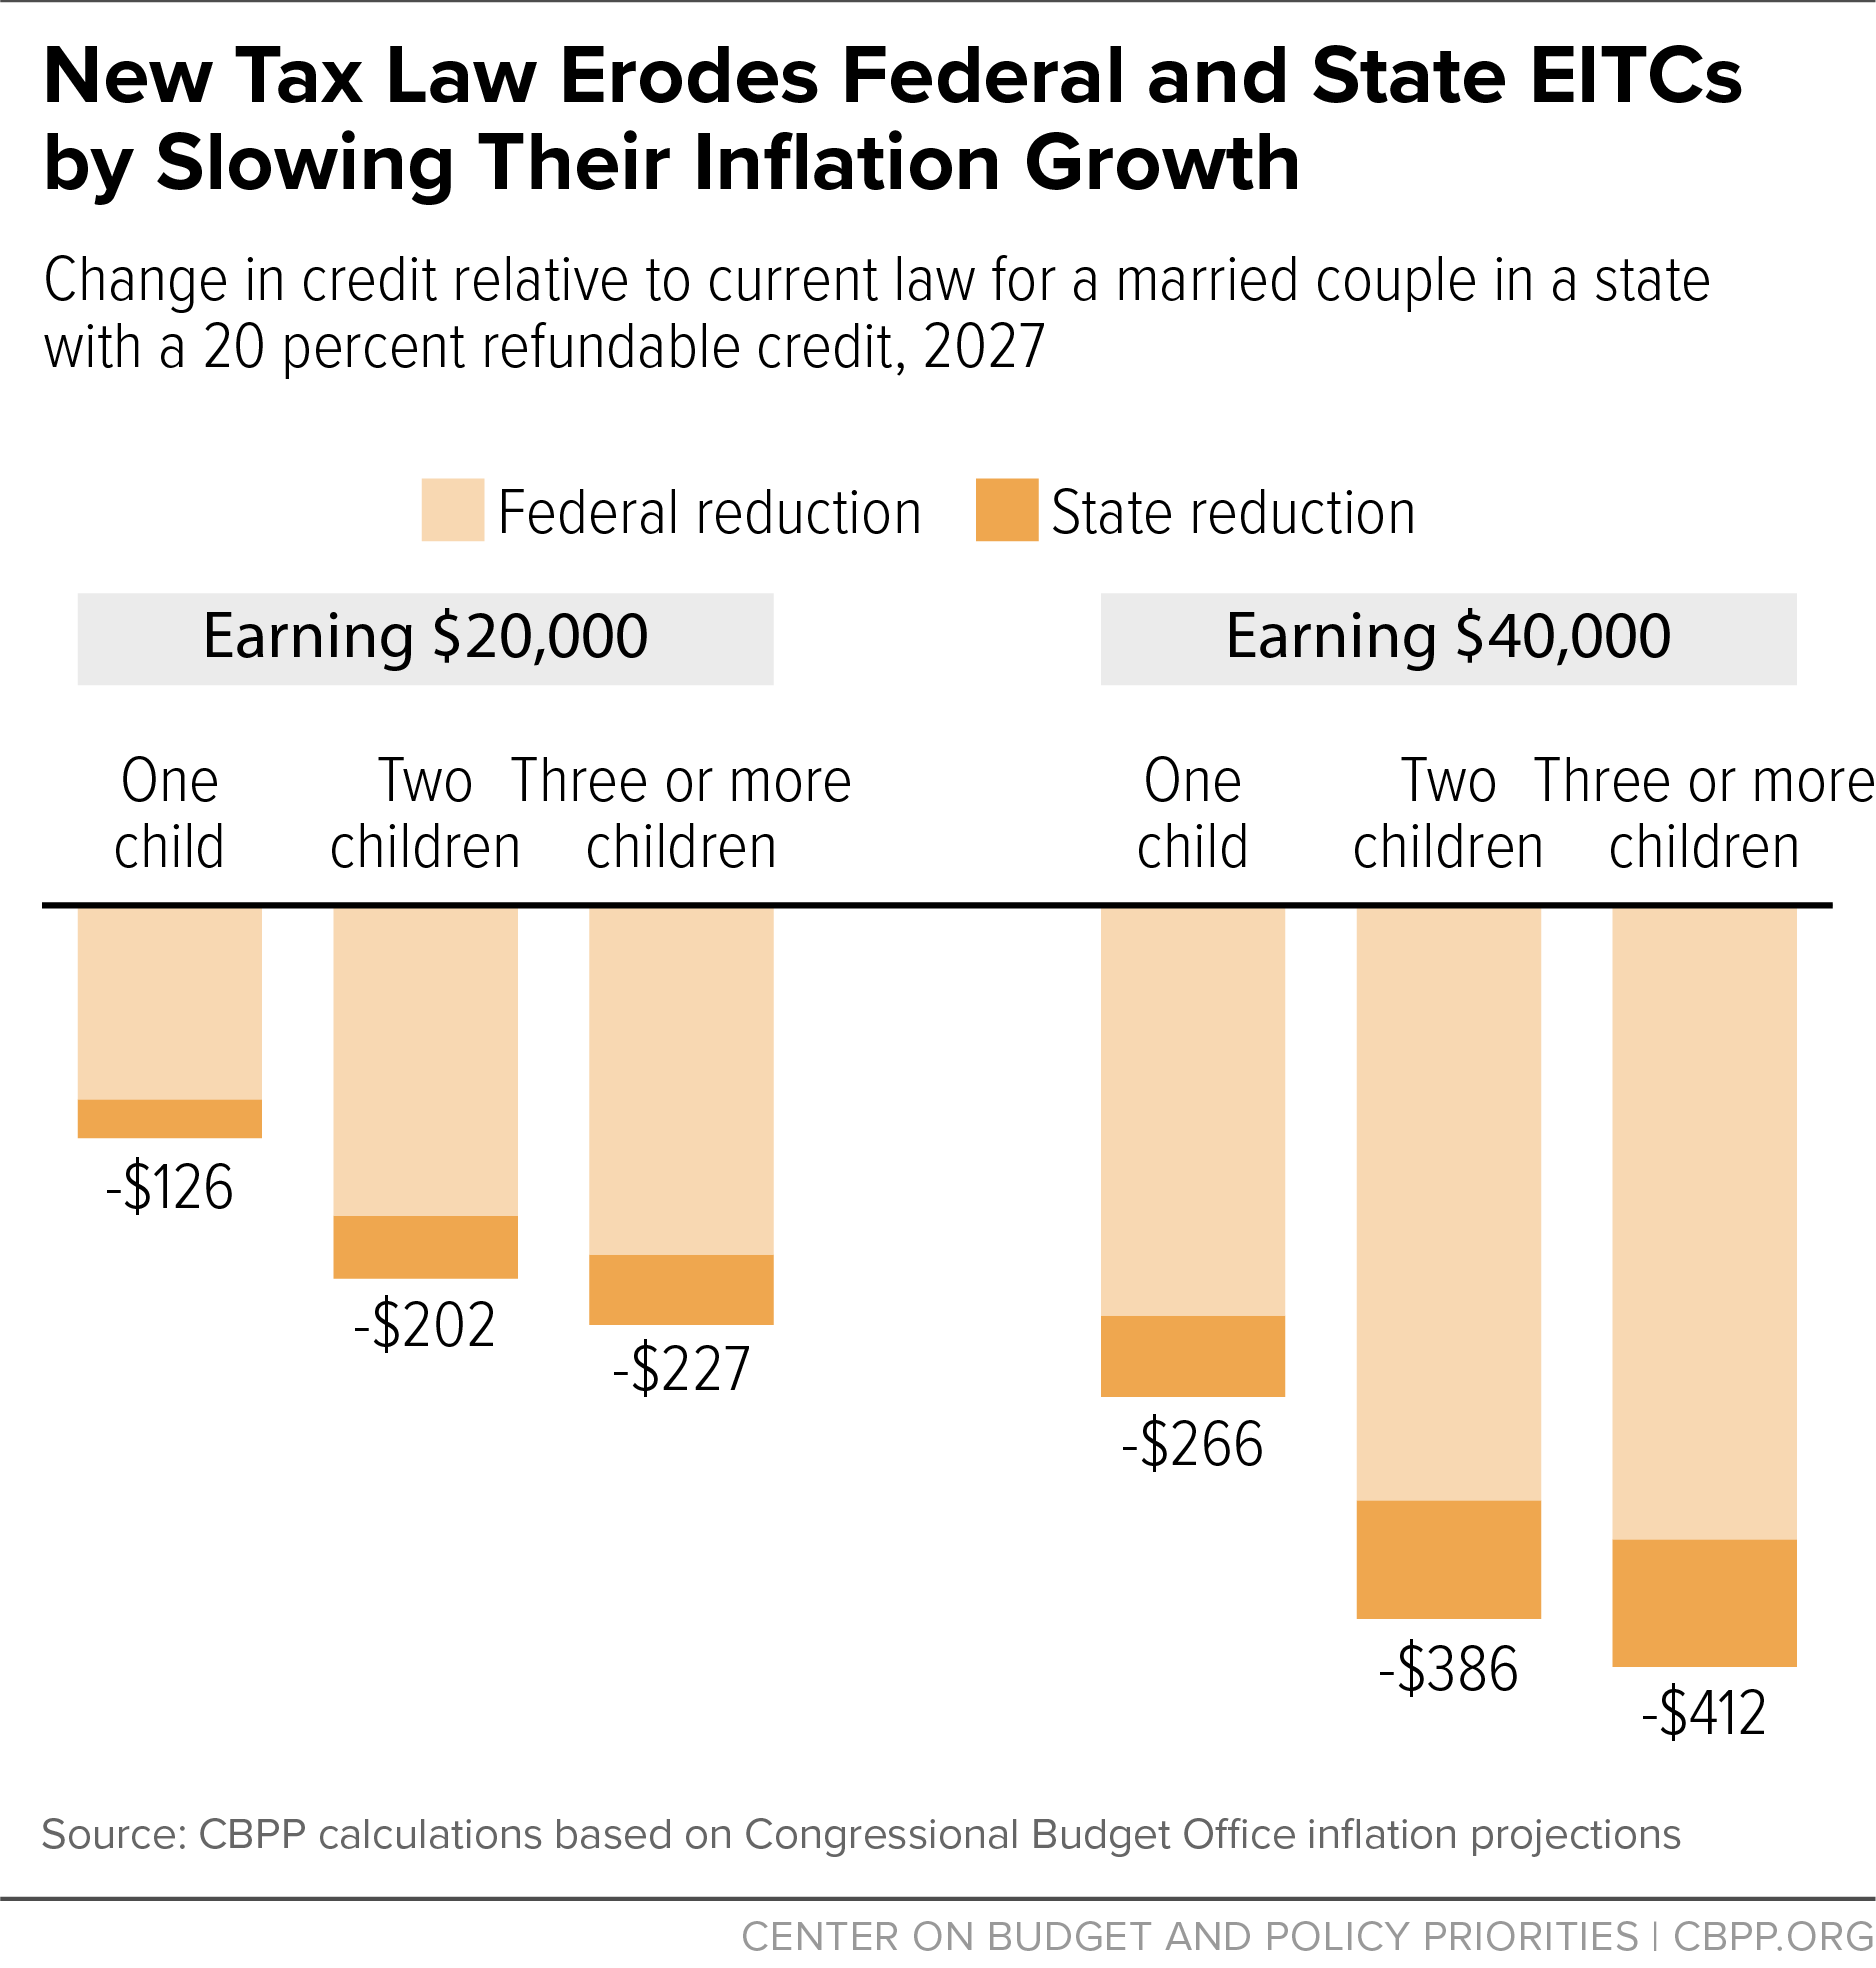 New Tax Law Erodes Federal and State EITCs by Slowing Their Inflation Growth